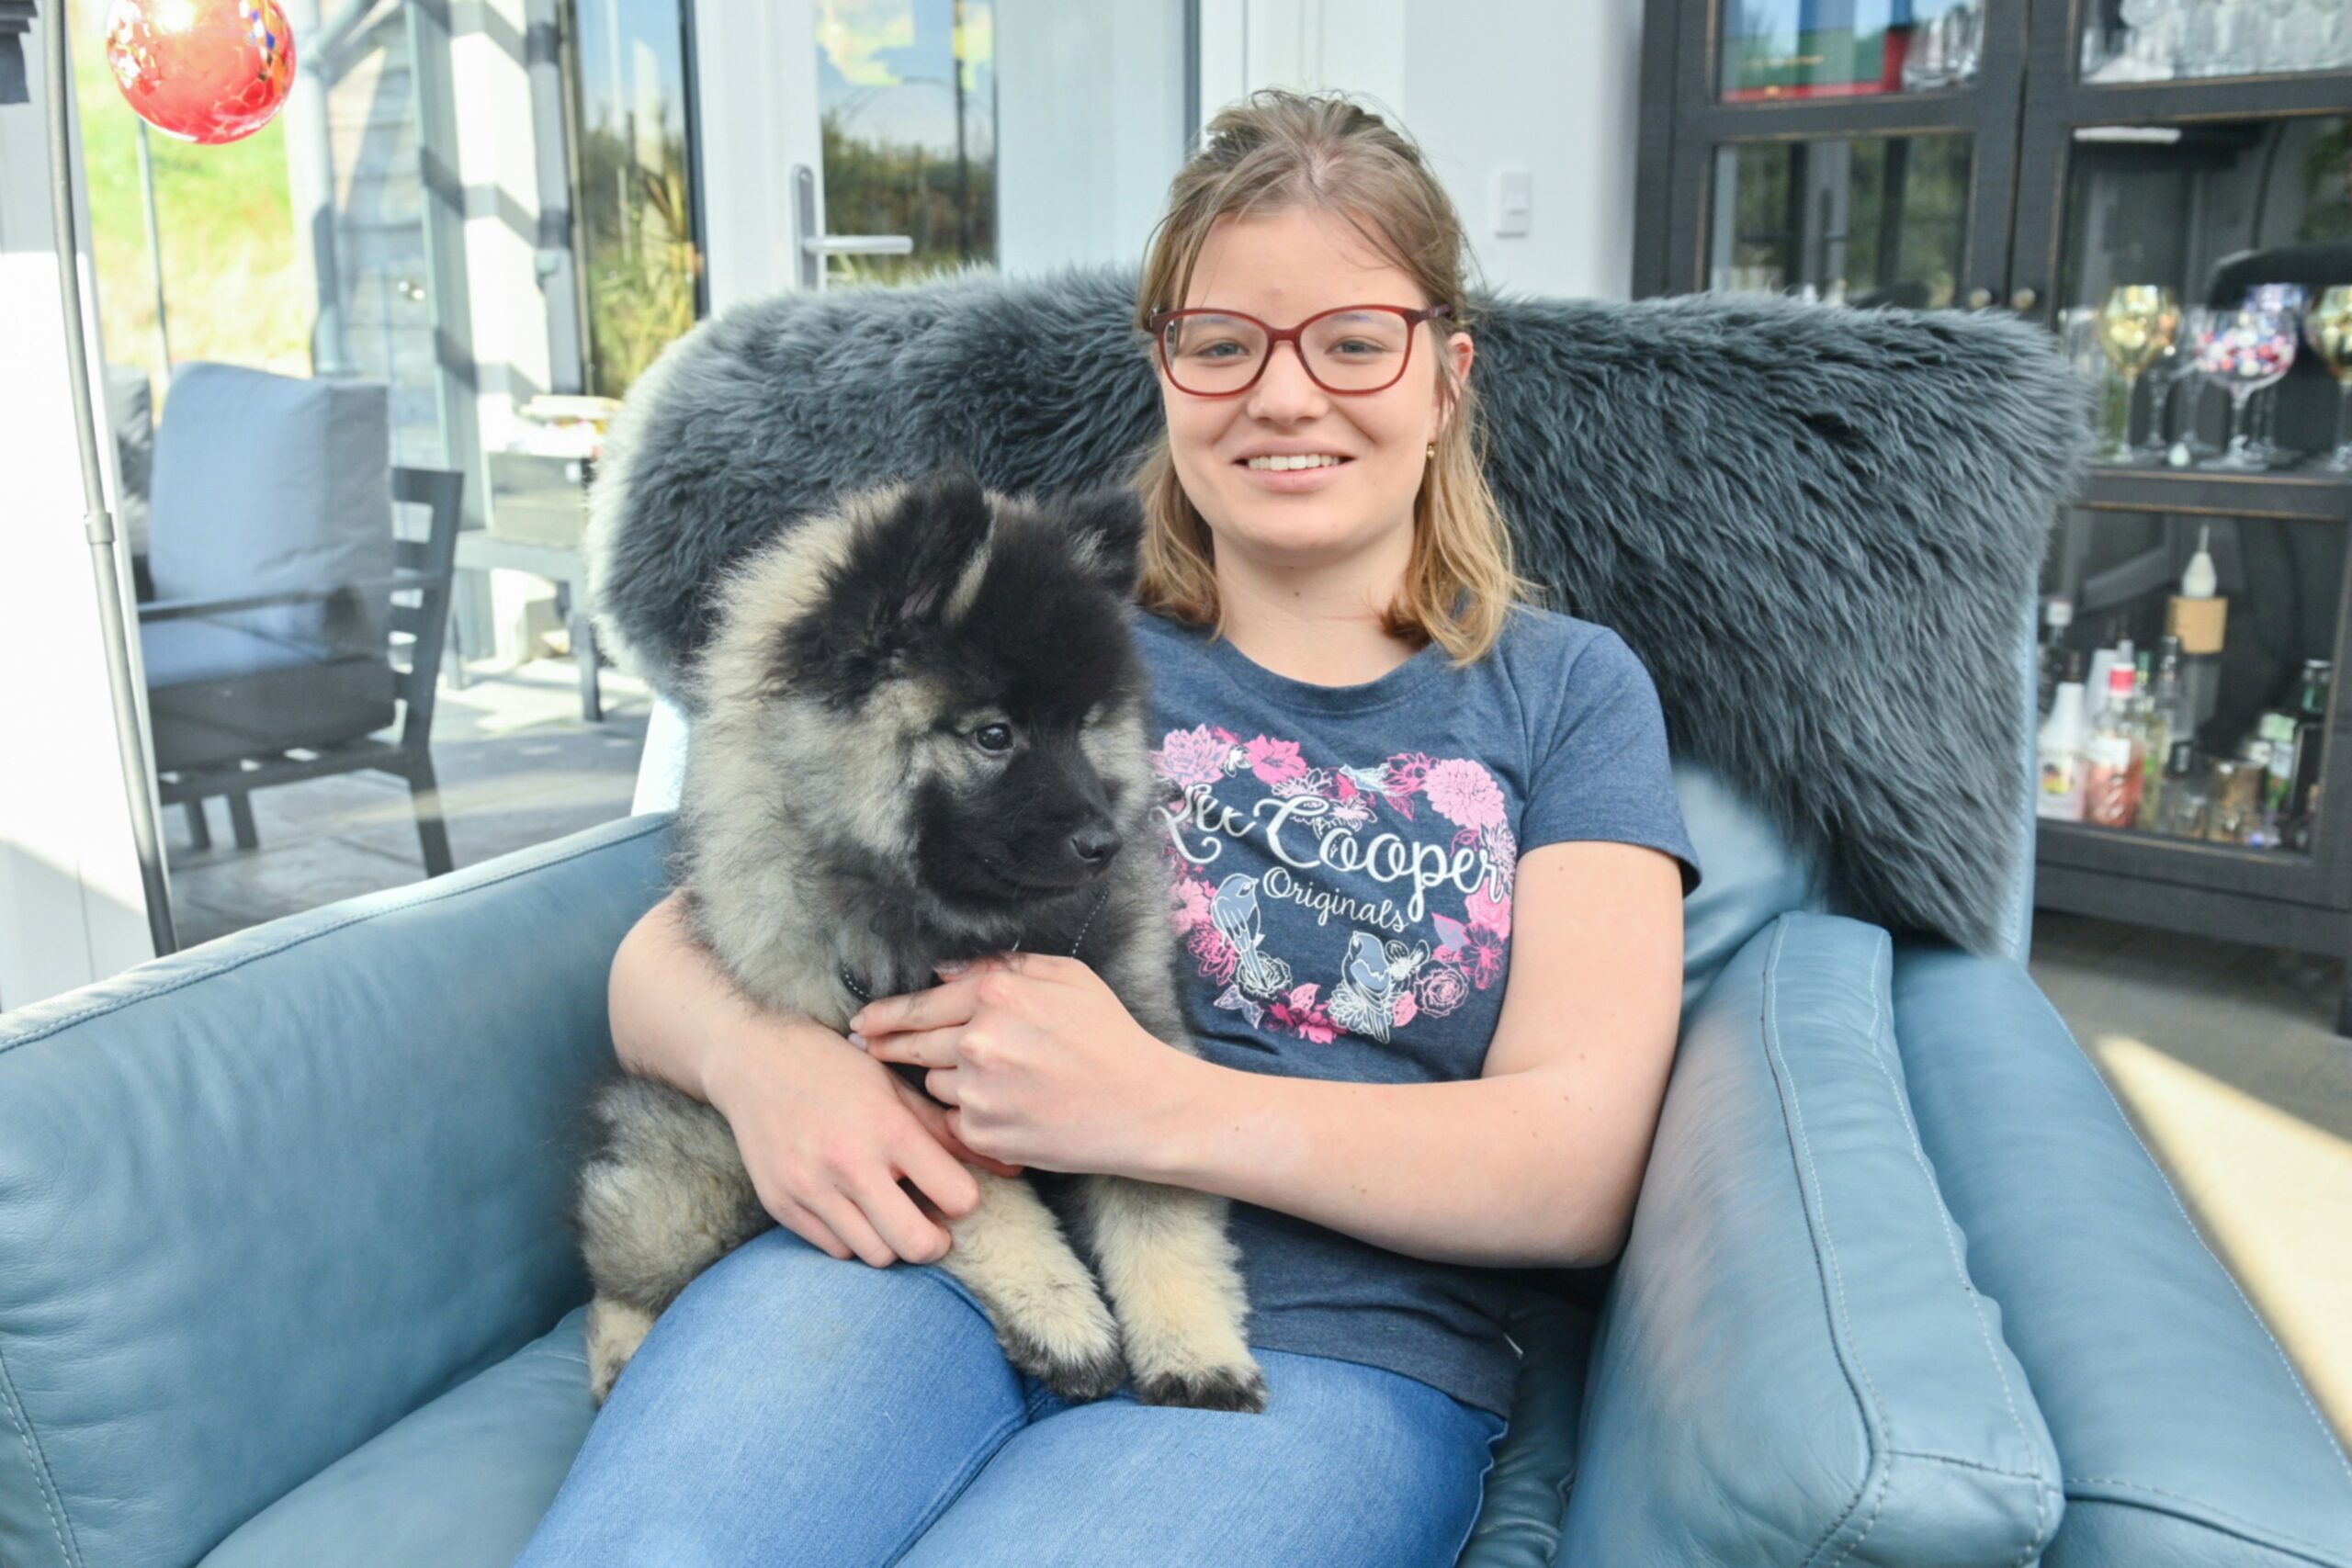 Martyna at home with dog Odin. Images: Jason Hedges/DC Thomson